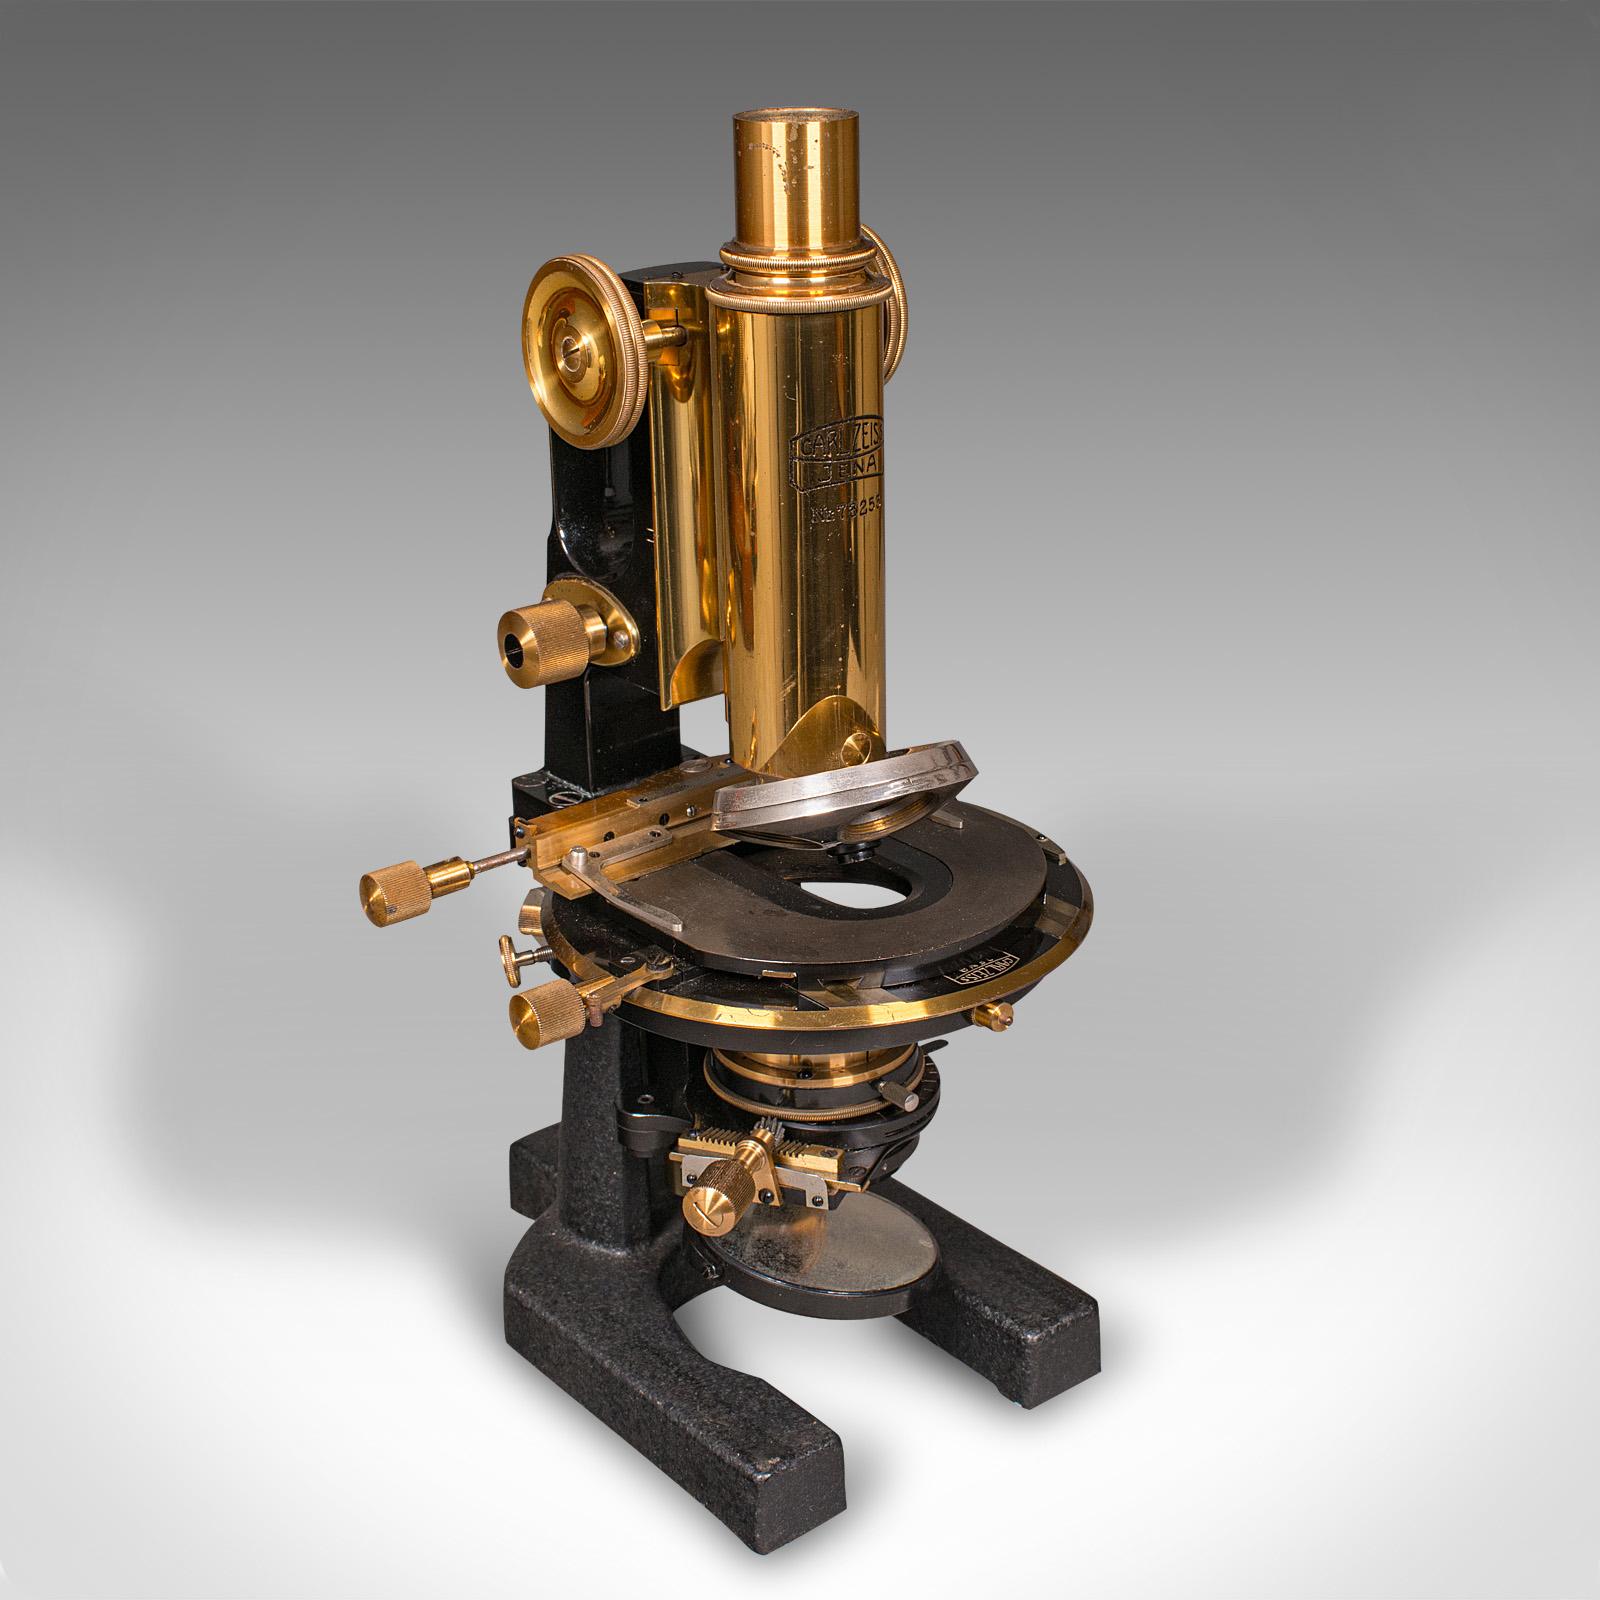 This is an antique laboratory microscope. A German, brass and enamelled metal scientific instrument by Carl Zeiss Jena, dating to the early 20th century, circa 1920.

Delightfully comprehensive cased microscope, from the renowned Carl Zeiss